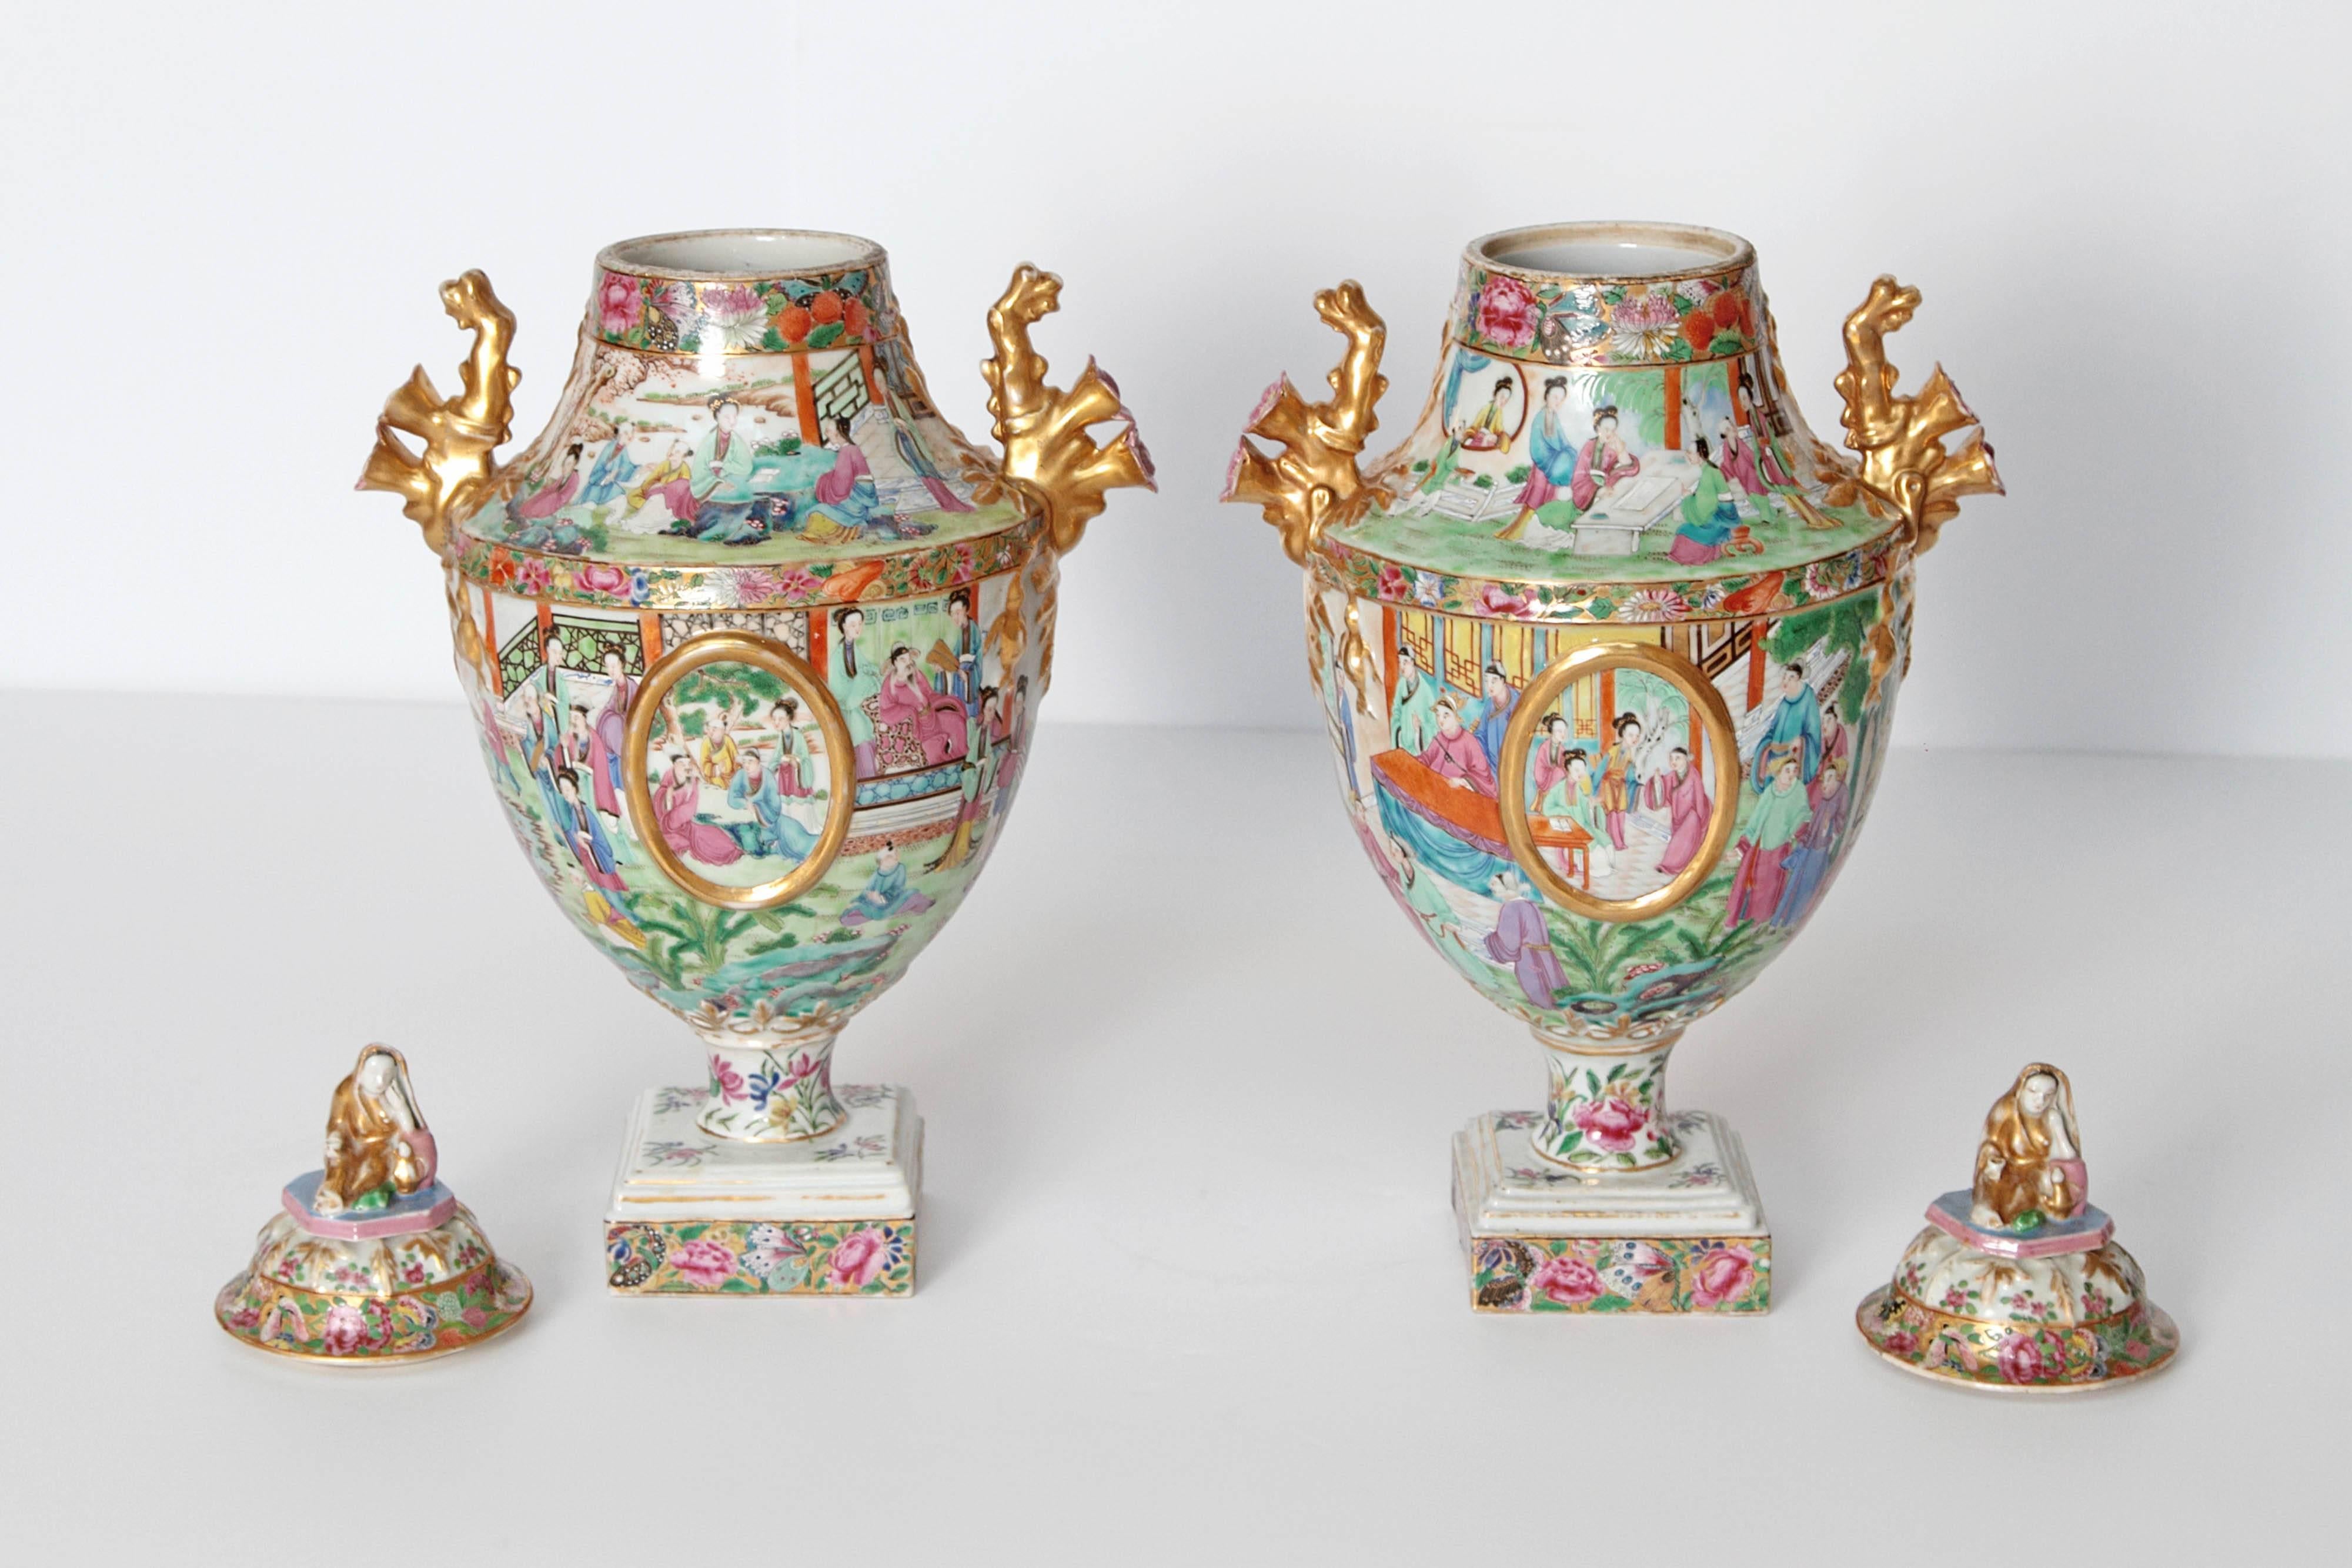 Chinese Export Covered Urns, Pair 4